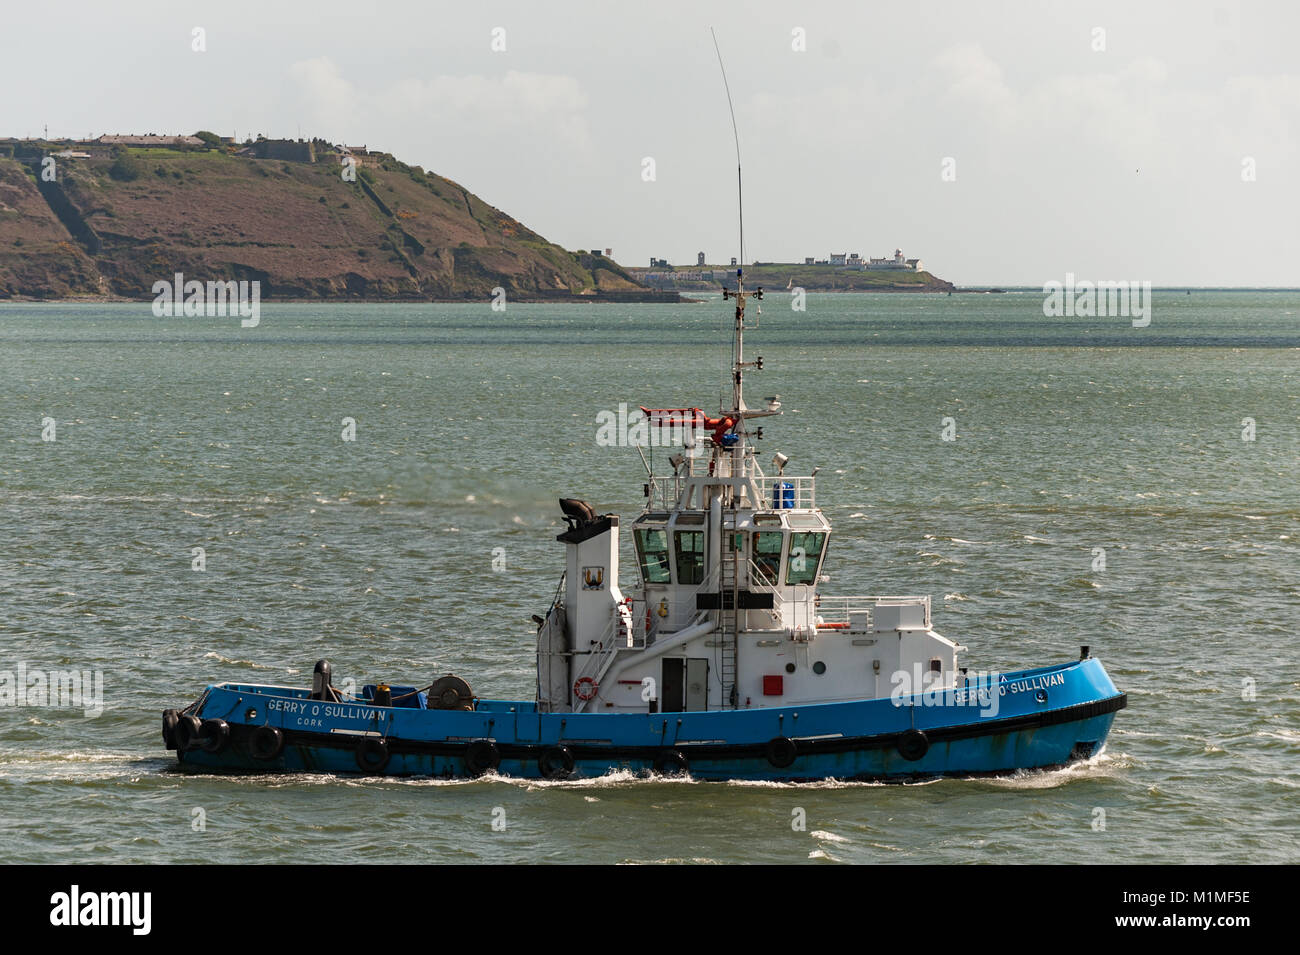 Port of Cork tugboat 'Gerry O'Sullivan' makes her way past Cobh, County Cork, Ireland with Roches Point Lighthouse in the background. Stock Photo